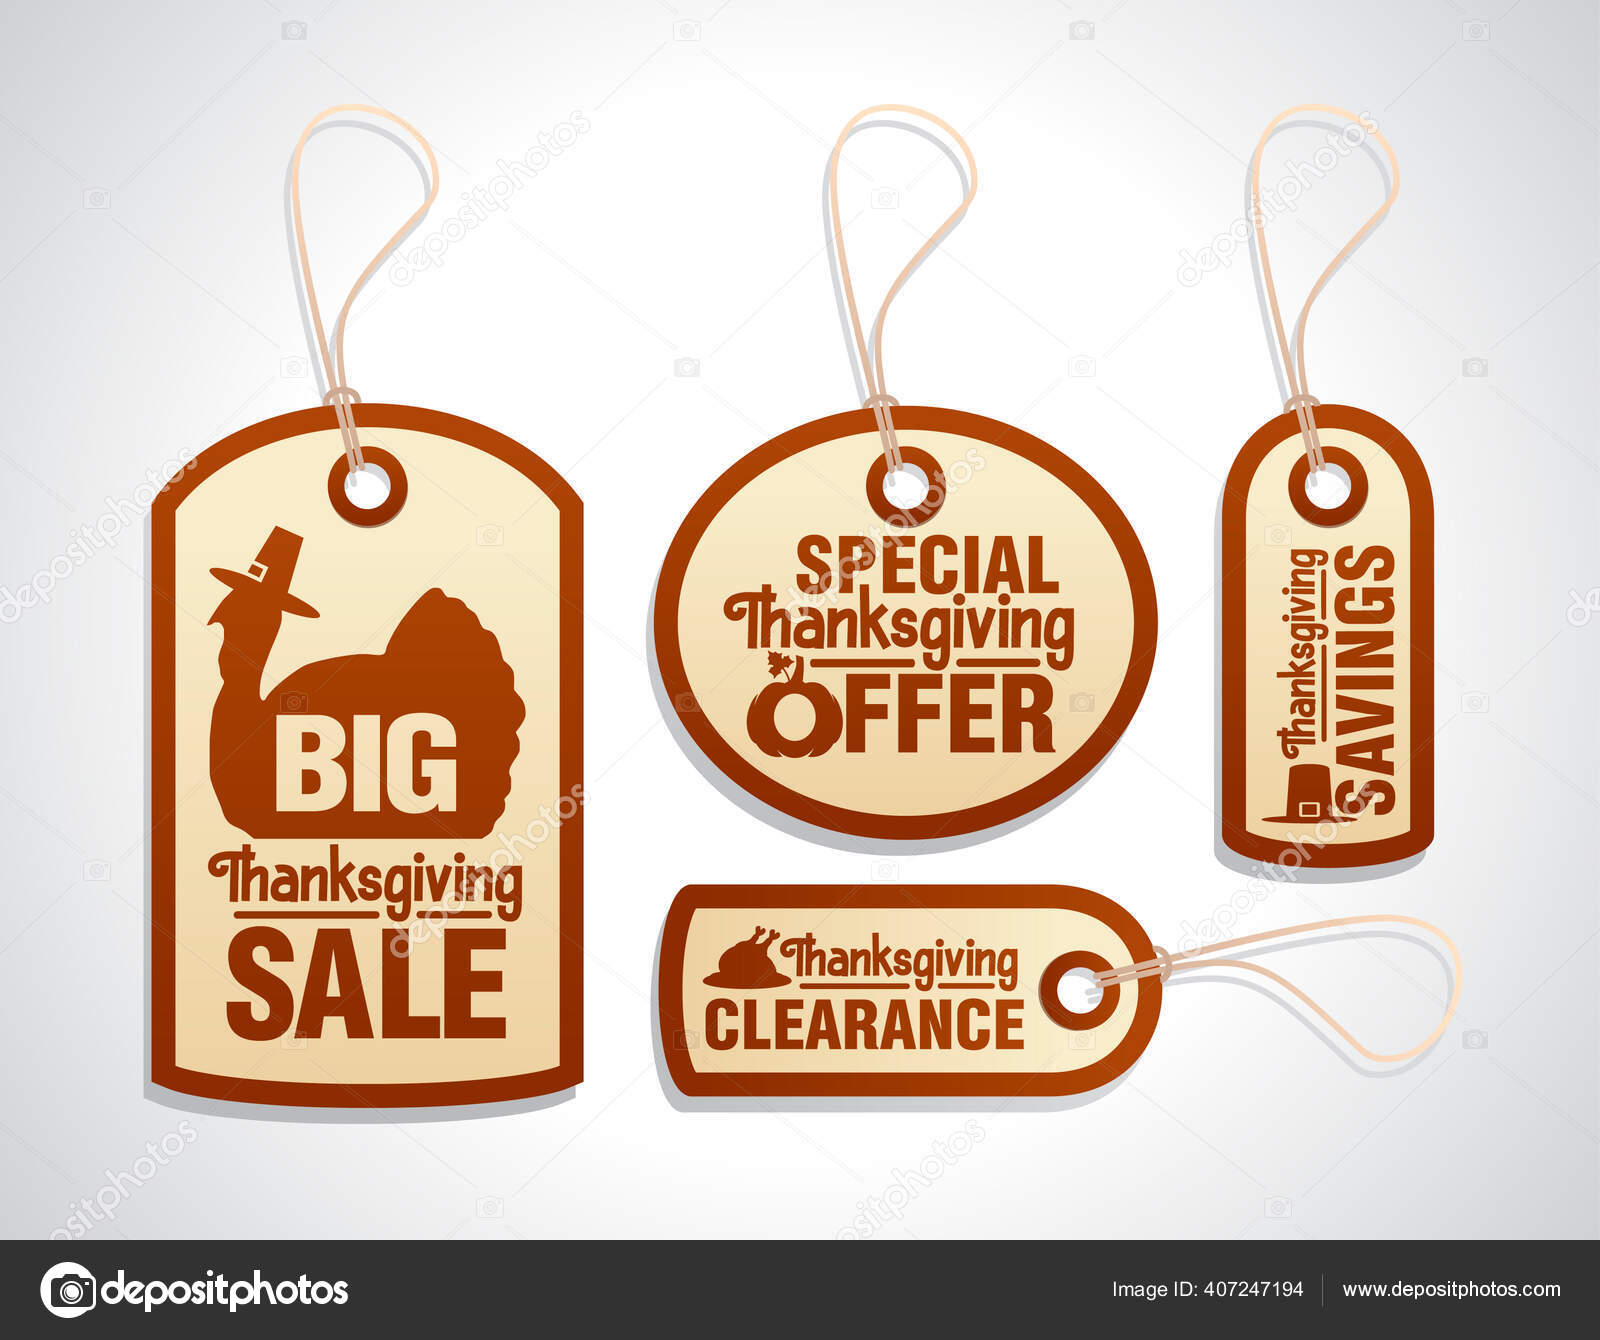 Sale clearance Vectors & Illustrations for Free Download